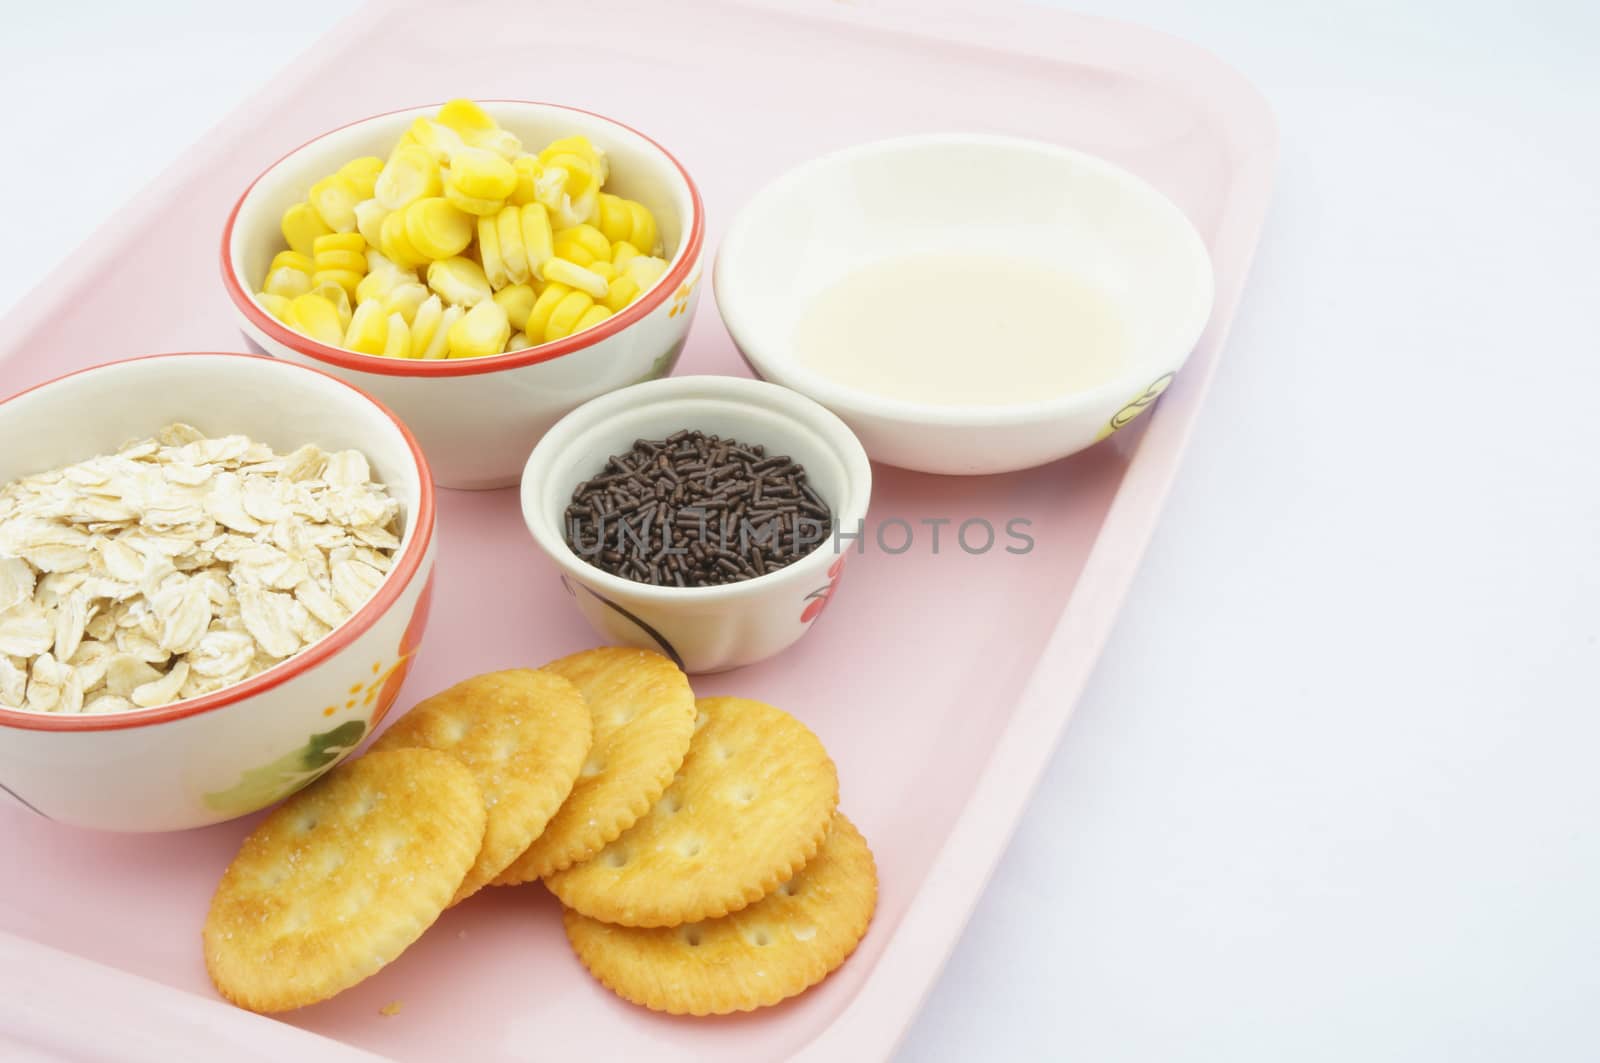 Corn, oats, chocolate, cracker and sweetened condensed milk placed on pink tray with white background.